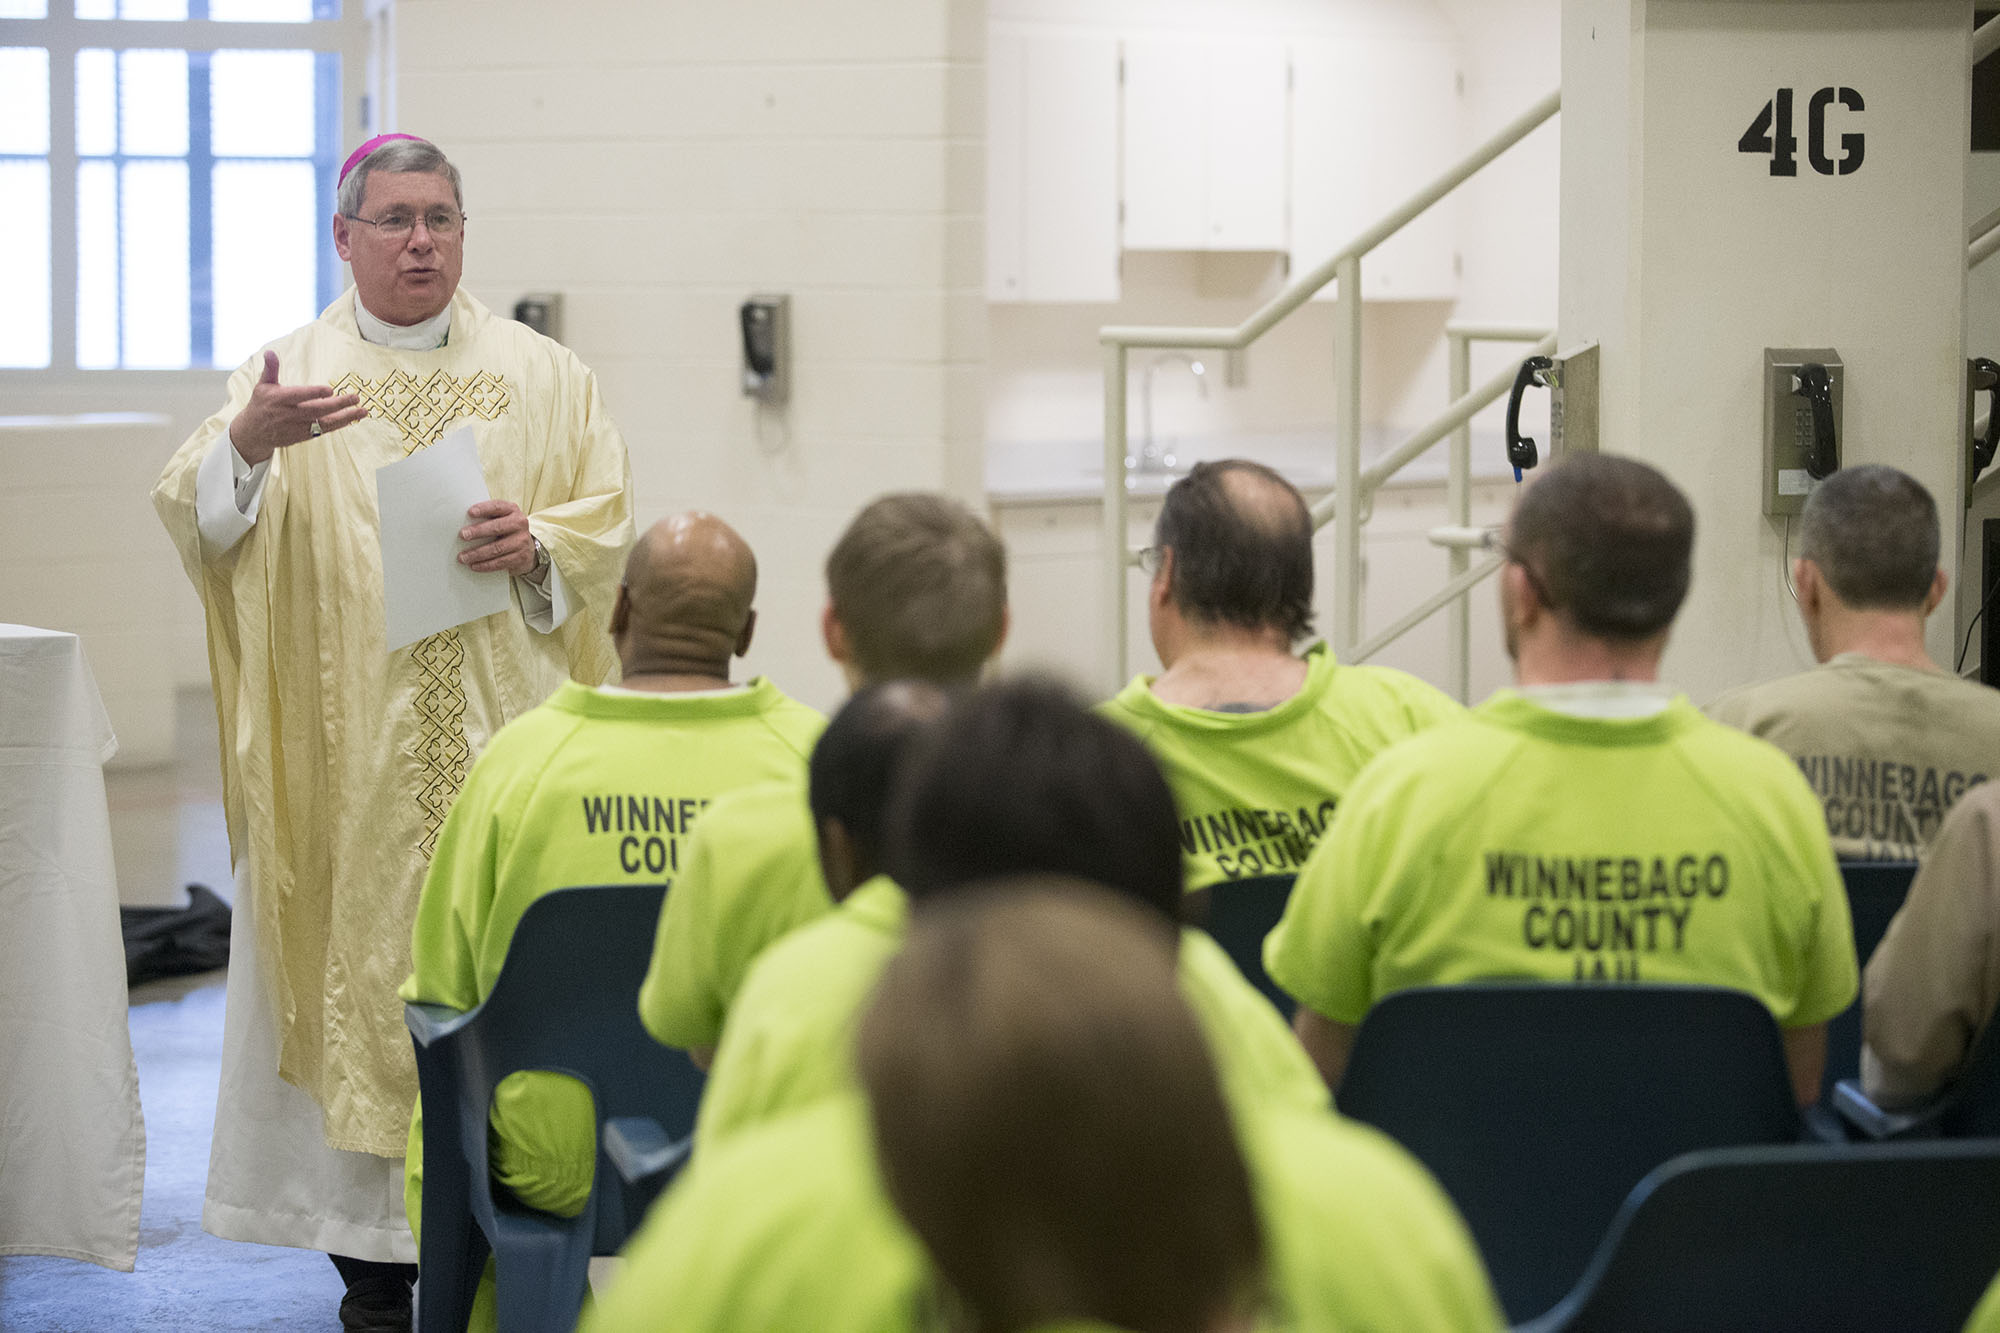 Bishop David J. Malloy delivers a sermon to inmates Sunday, March 27, 2016, during Easter Mass at the Winnebago County Jail in Rockford. MAX GERSH/STAFF PHOTOGRAPHER/RRSTAR.COM ©2016